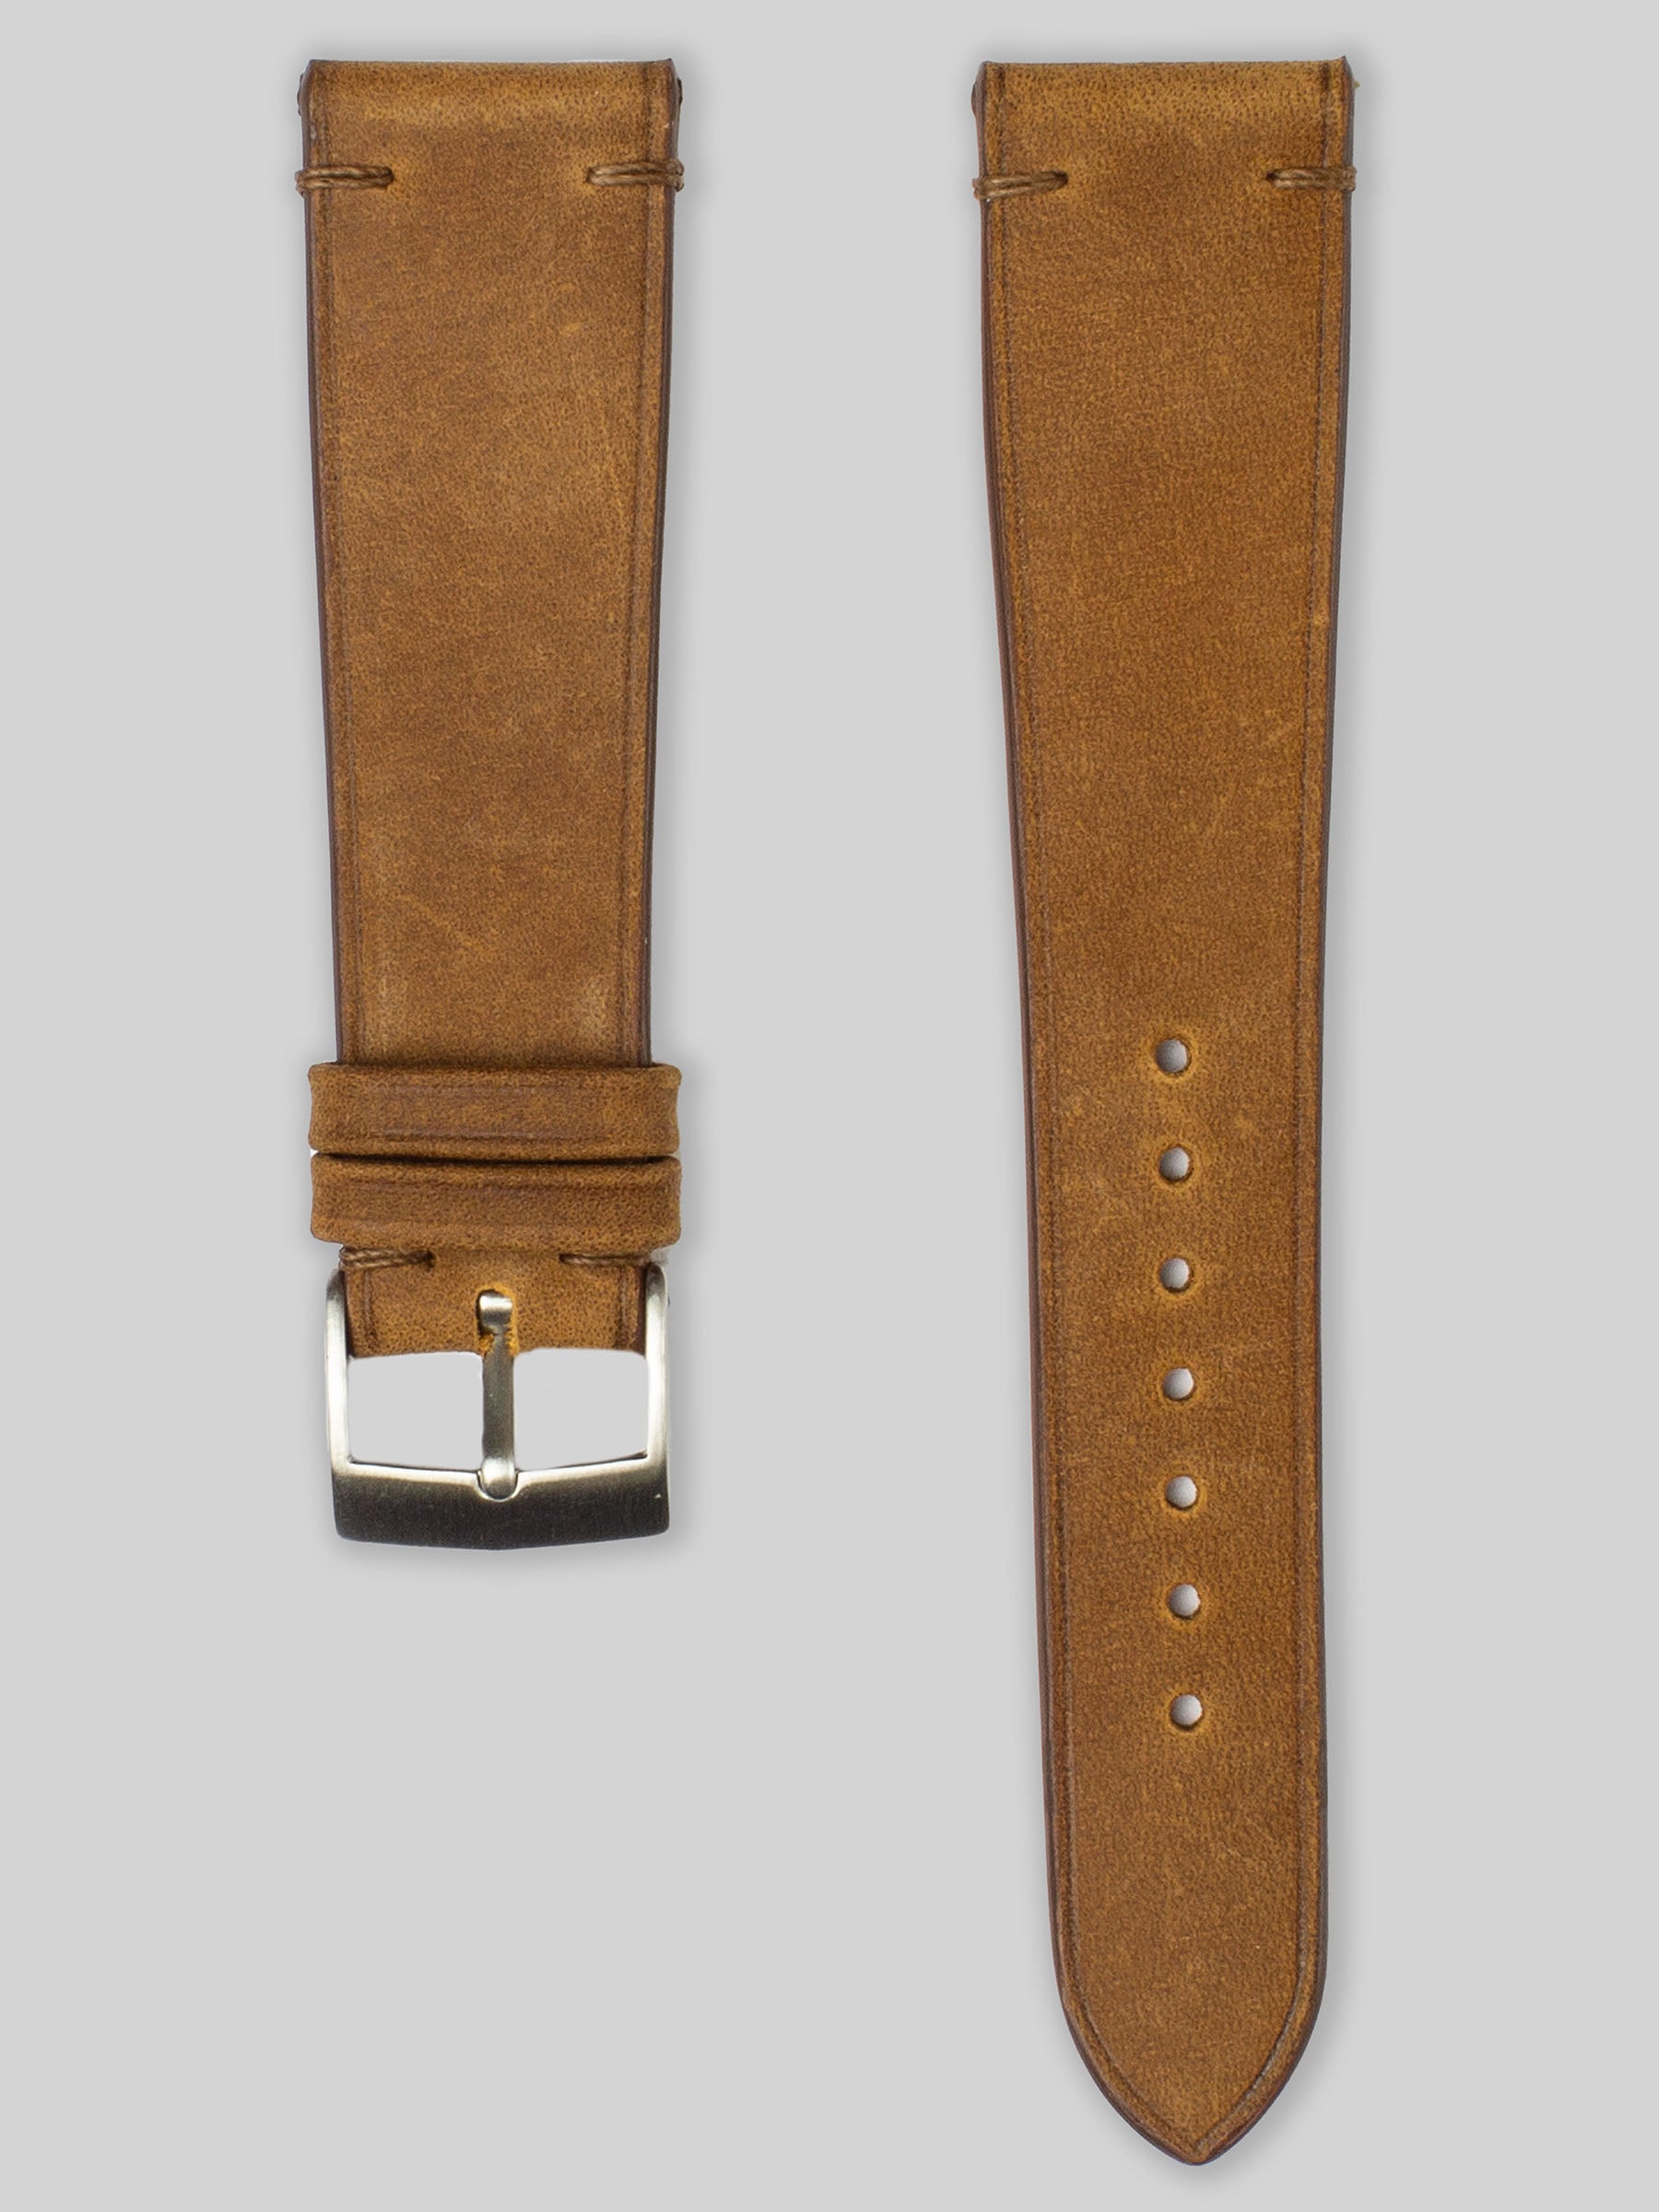 Horse Hide Leather Watch Strap - Saddle